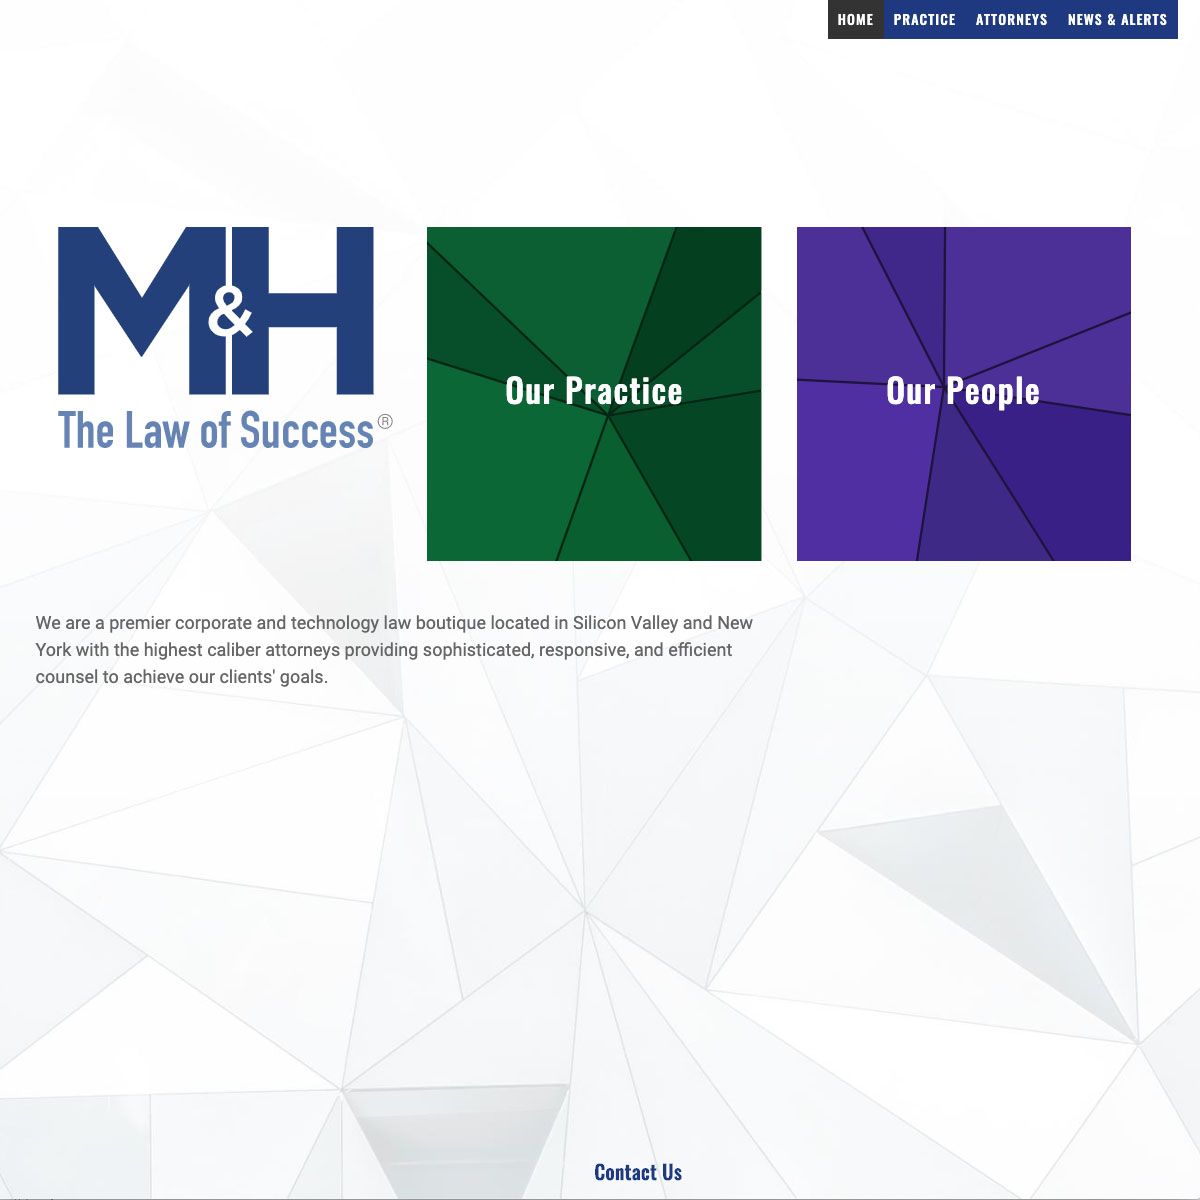 screenshot of the M&H LLP homepage, showing a minimalist design with a full screen geometric background image, mission statement, and links to Our Practice and Our People